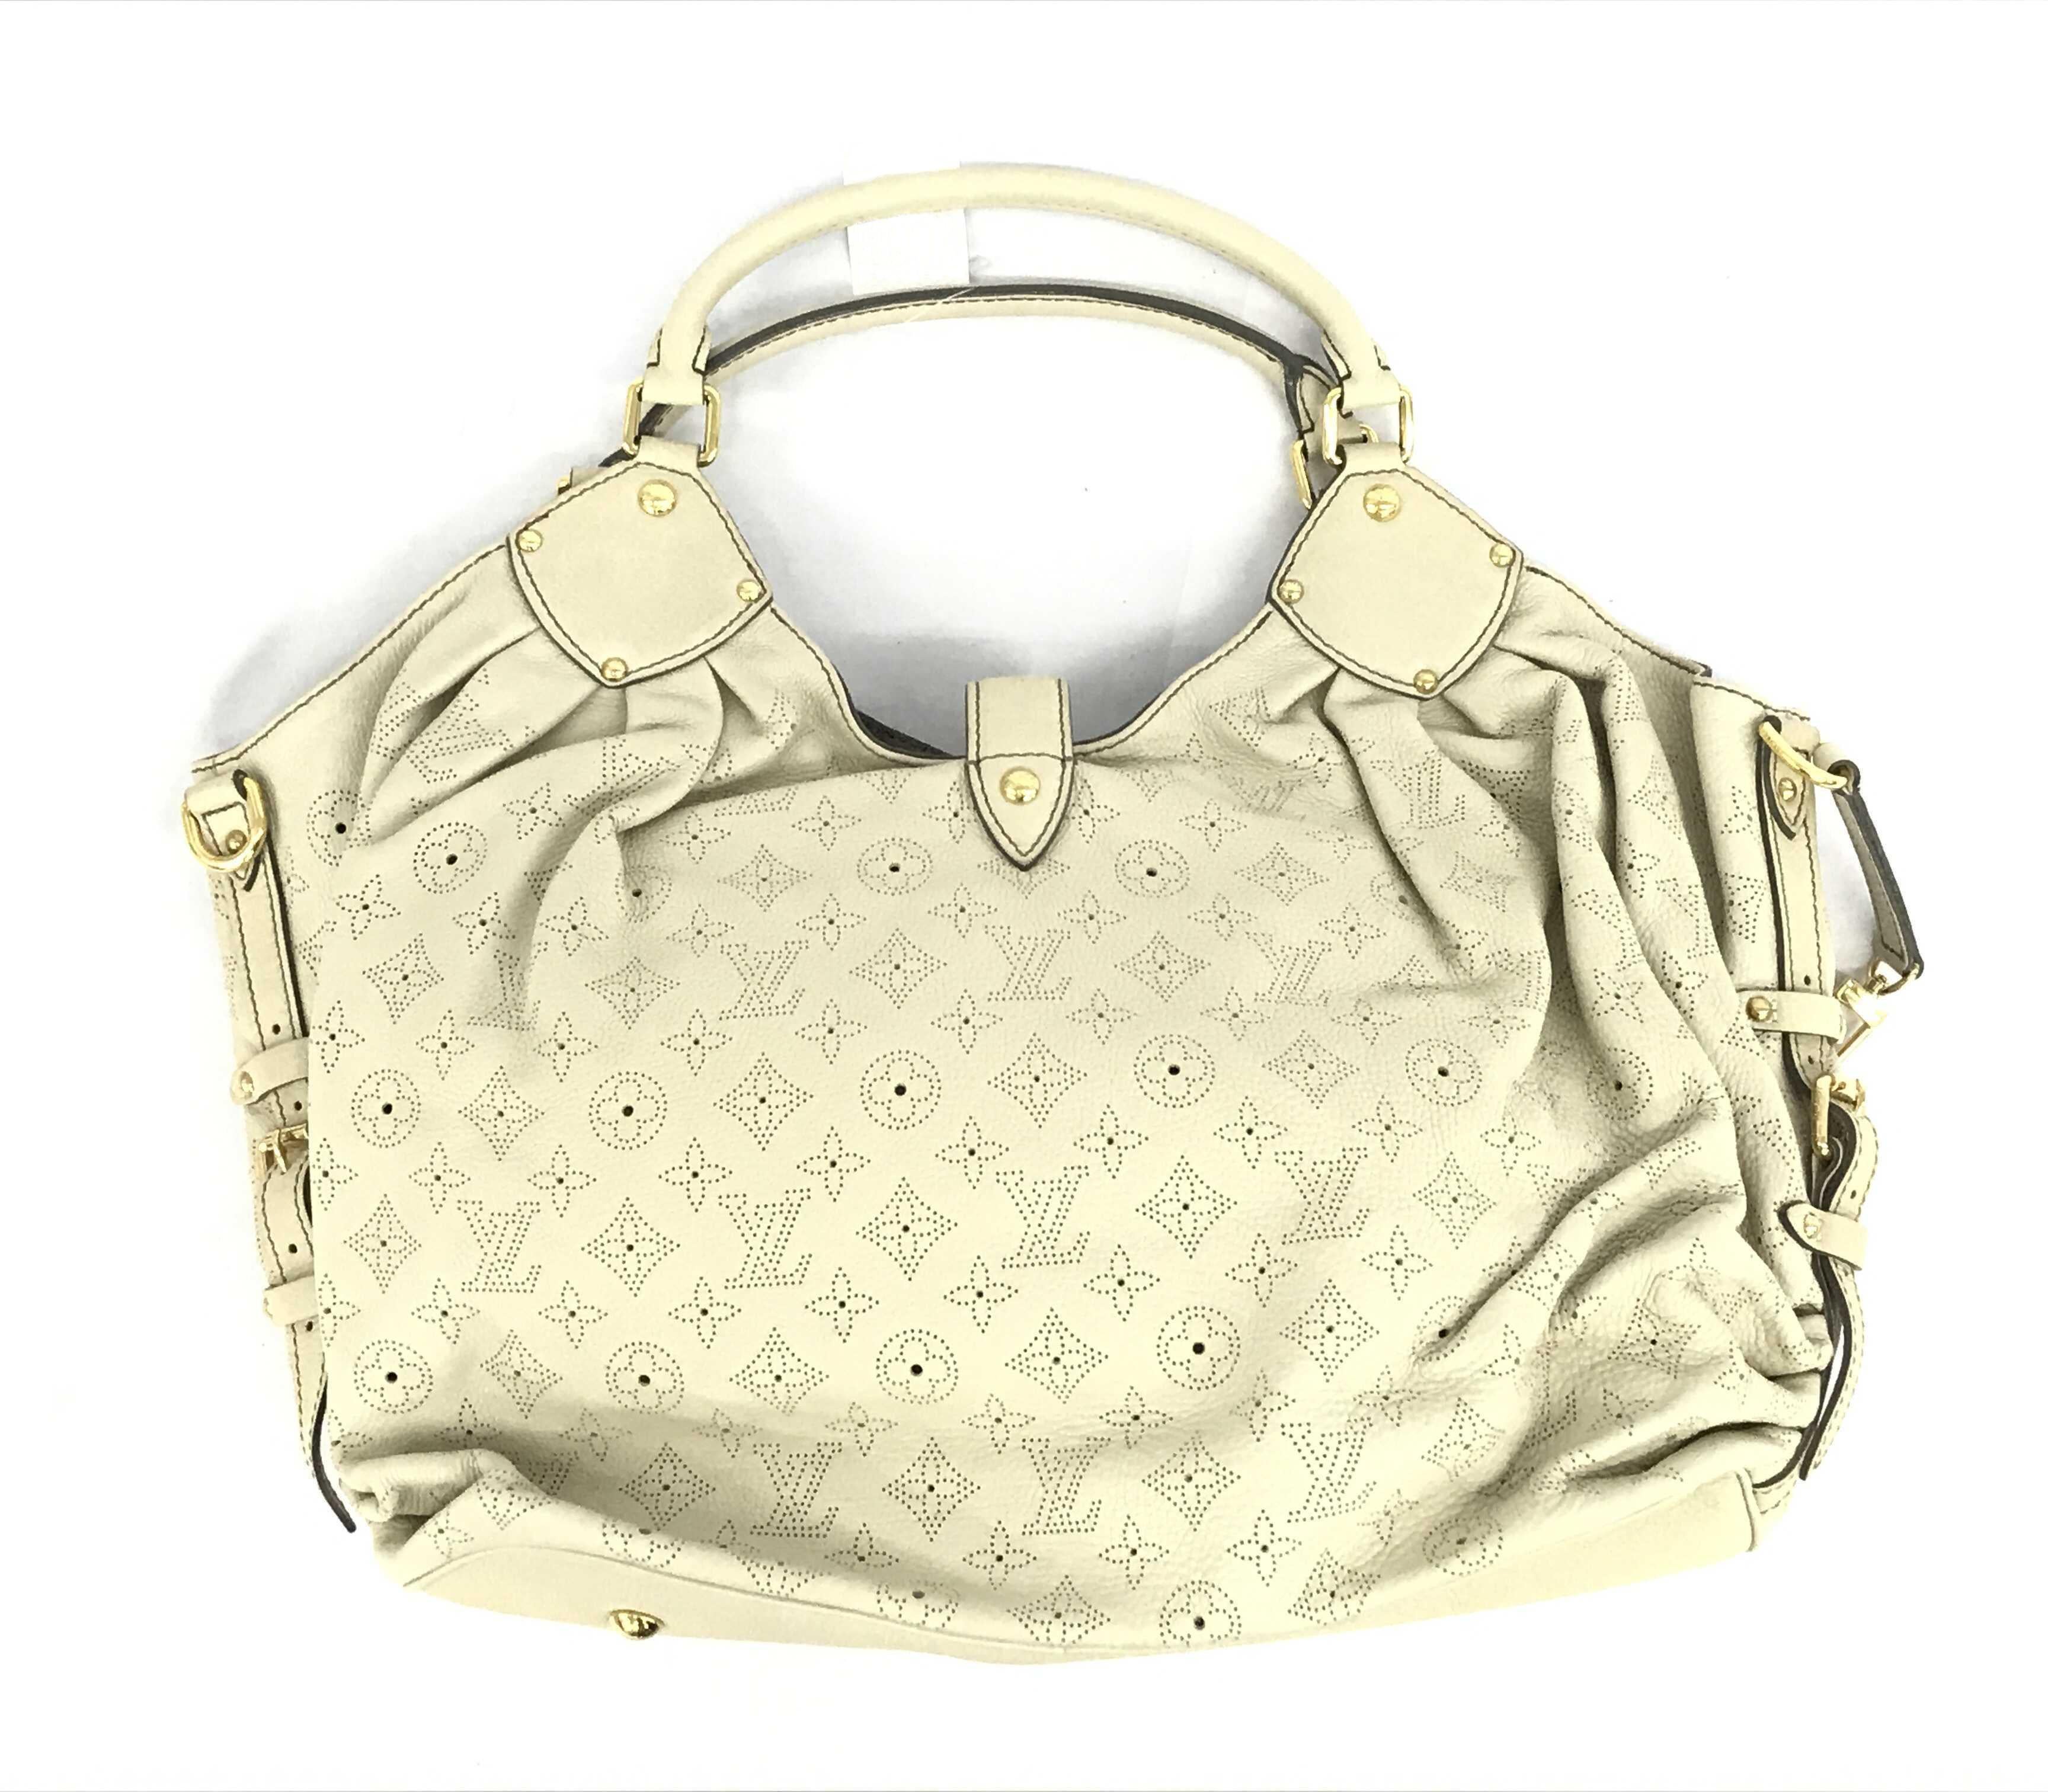 White perforated monogram Mahina leather Louis Vuitton XL hobo bog with calfskin leather, gray Alcantara interior lining, one zip pocket, double rolled leather handles, open top with leather flap tab and push-lock closure, gold-tone